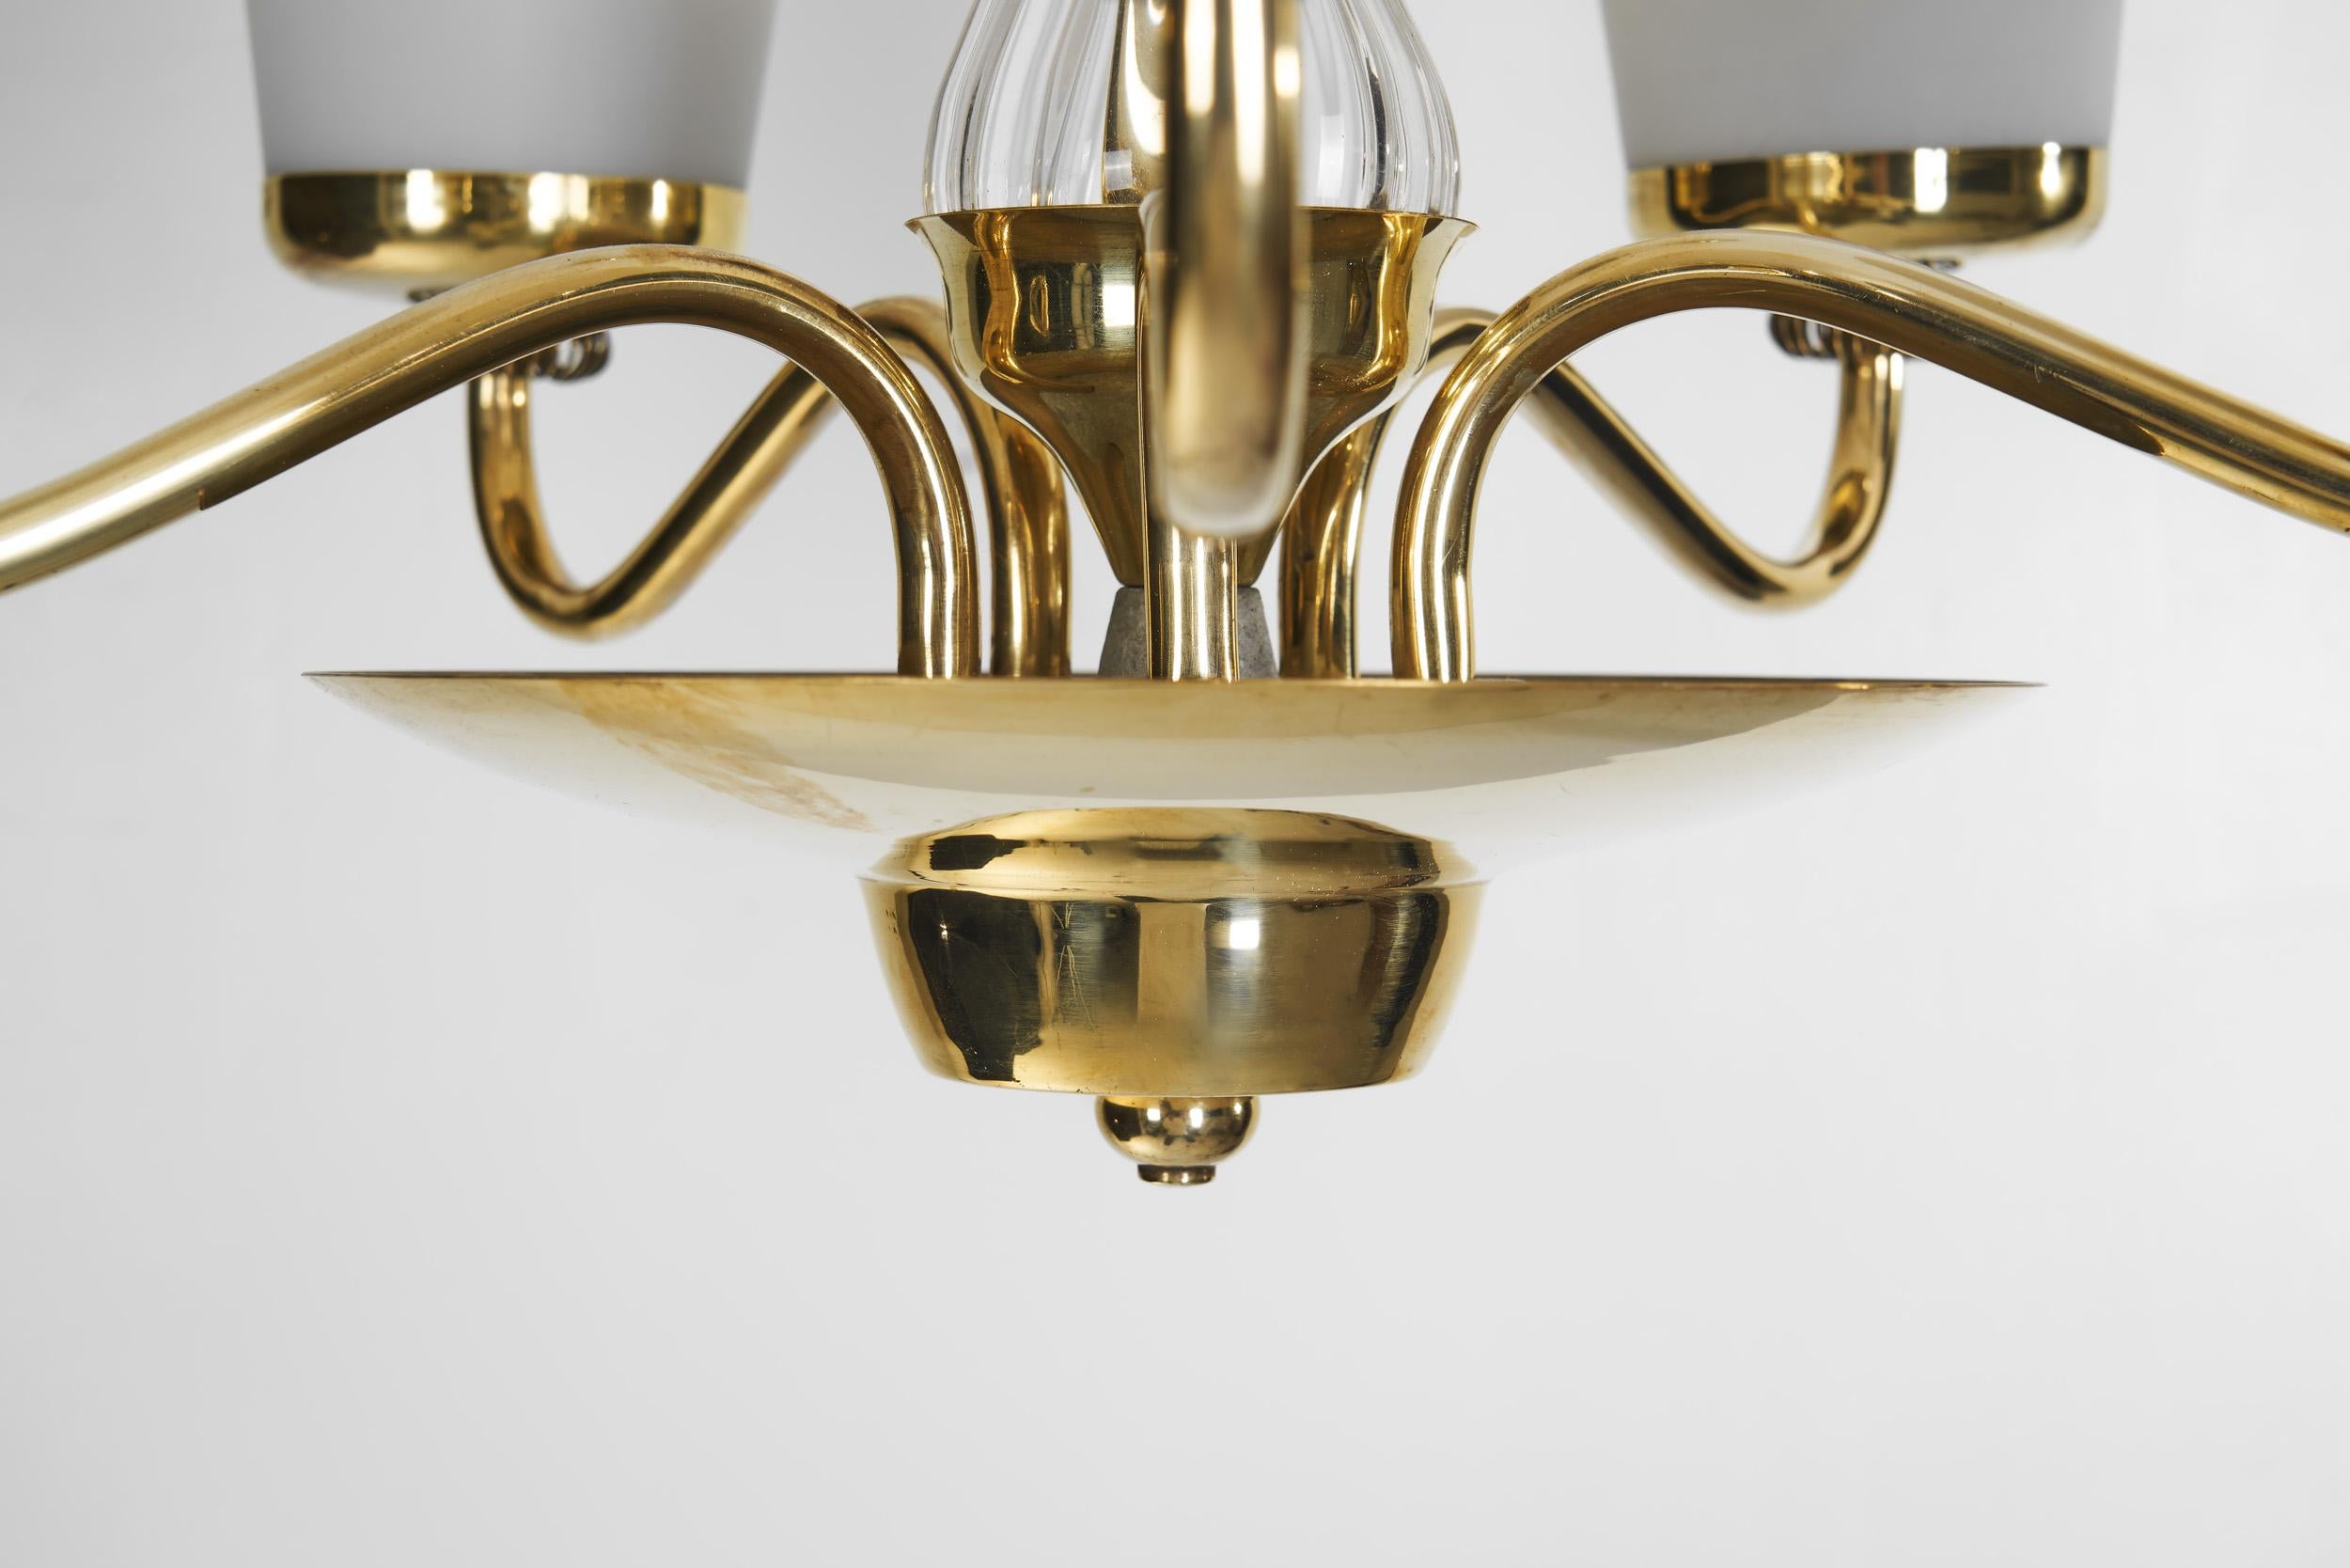 Finnish Brass and Opal Glass Chandelier by Saariston Valaisin, Finland ca 1950s For Sale 8